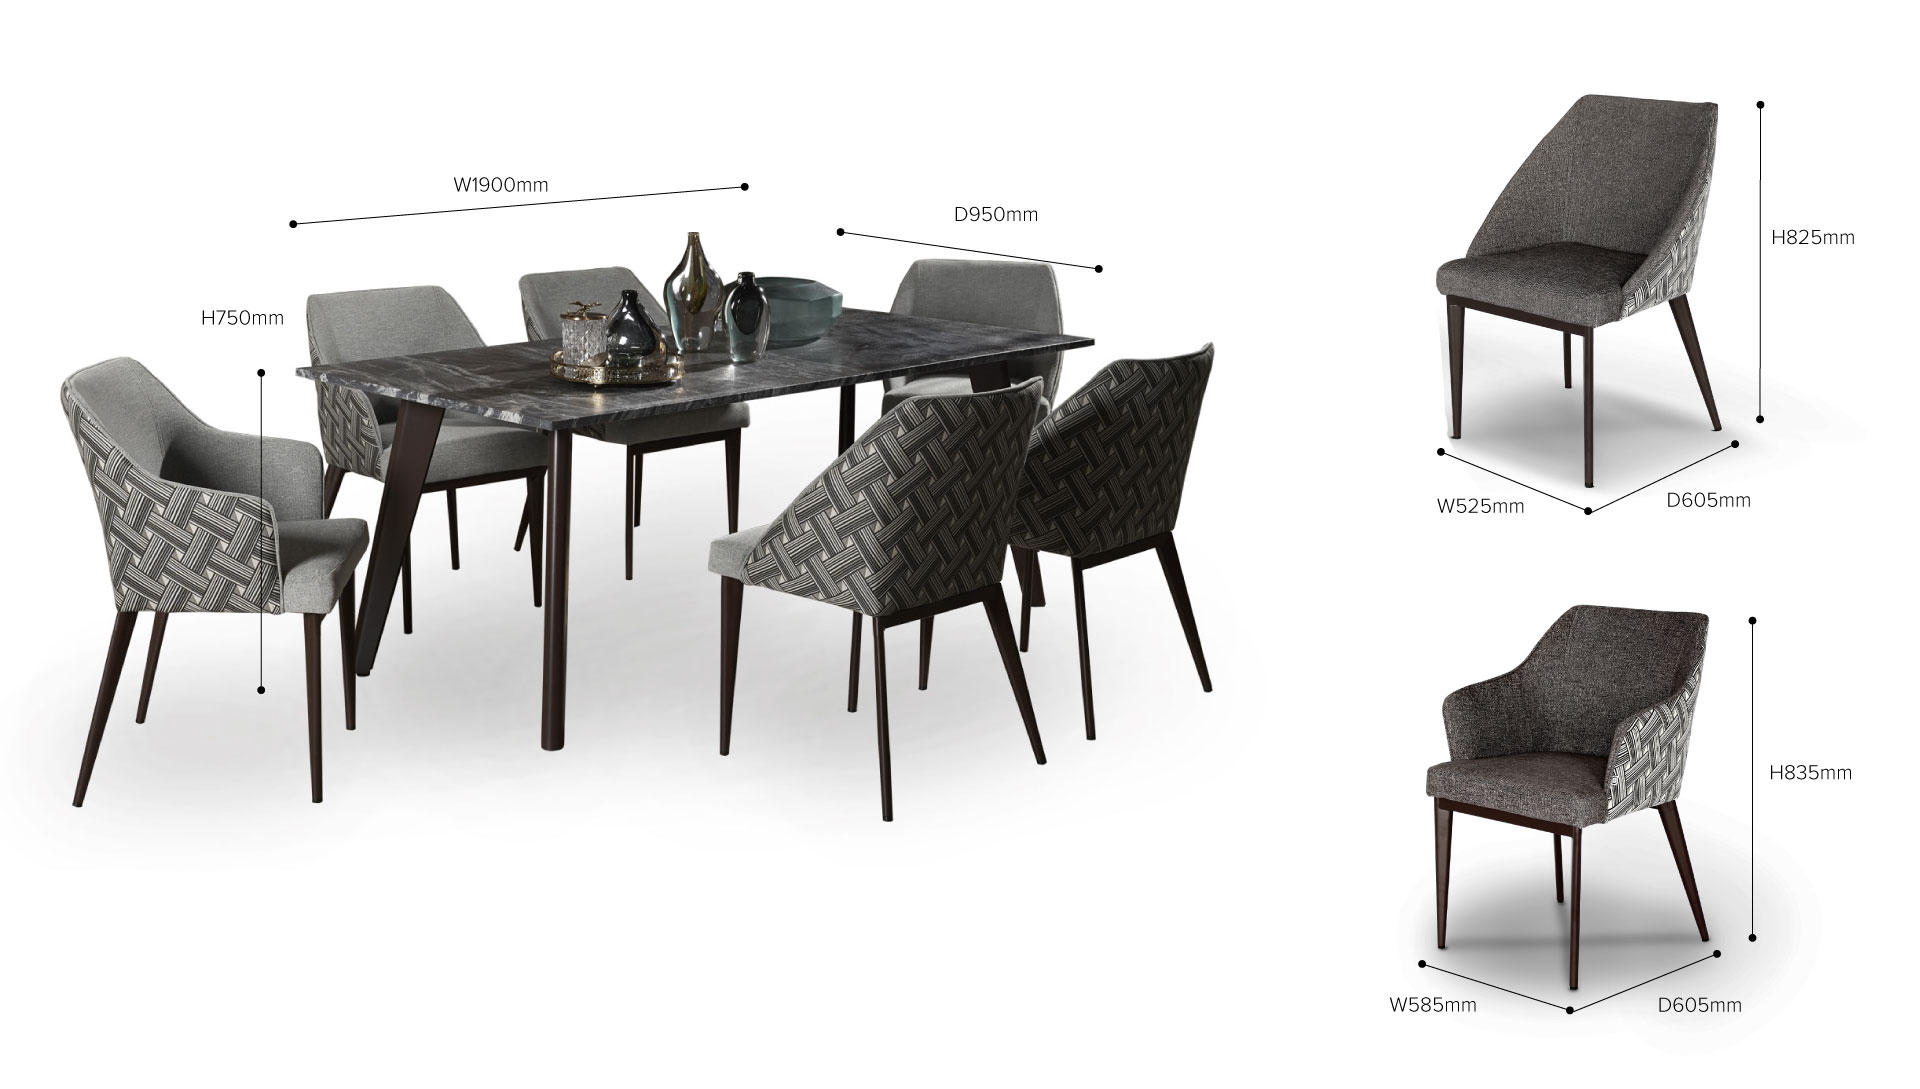 DS-Black-beauty-dining table malaysia